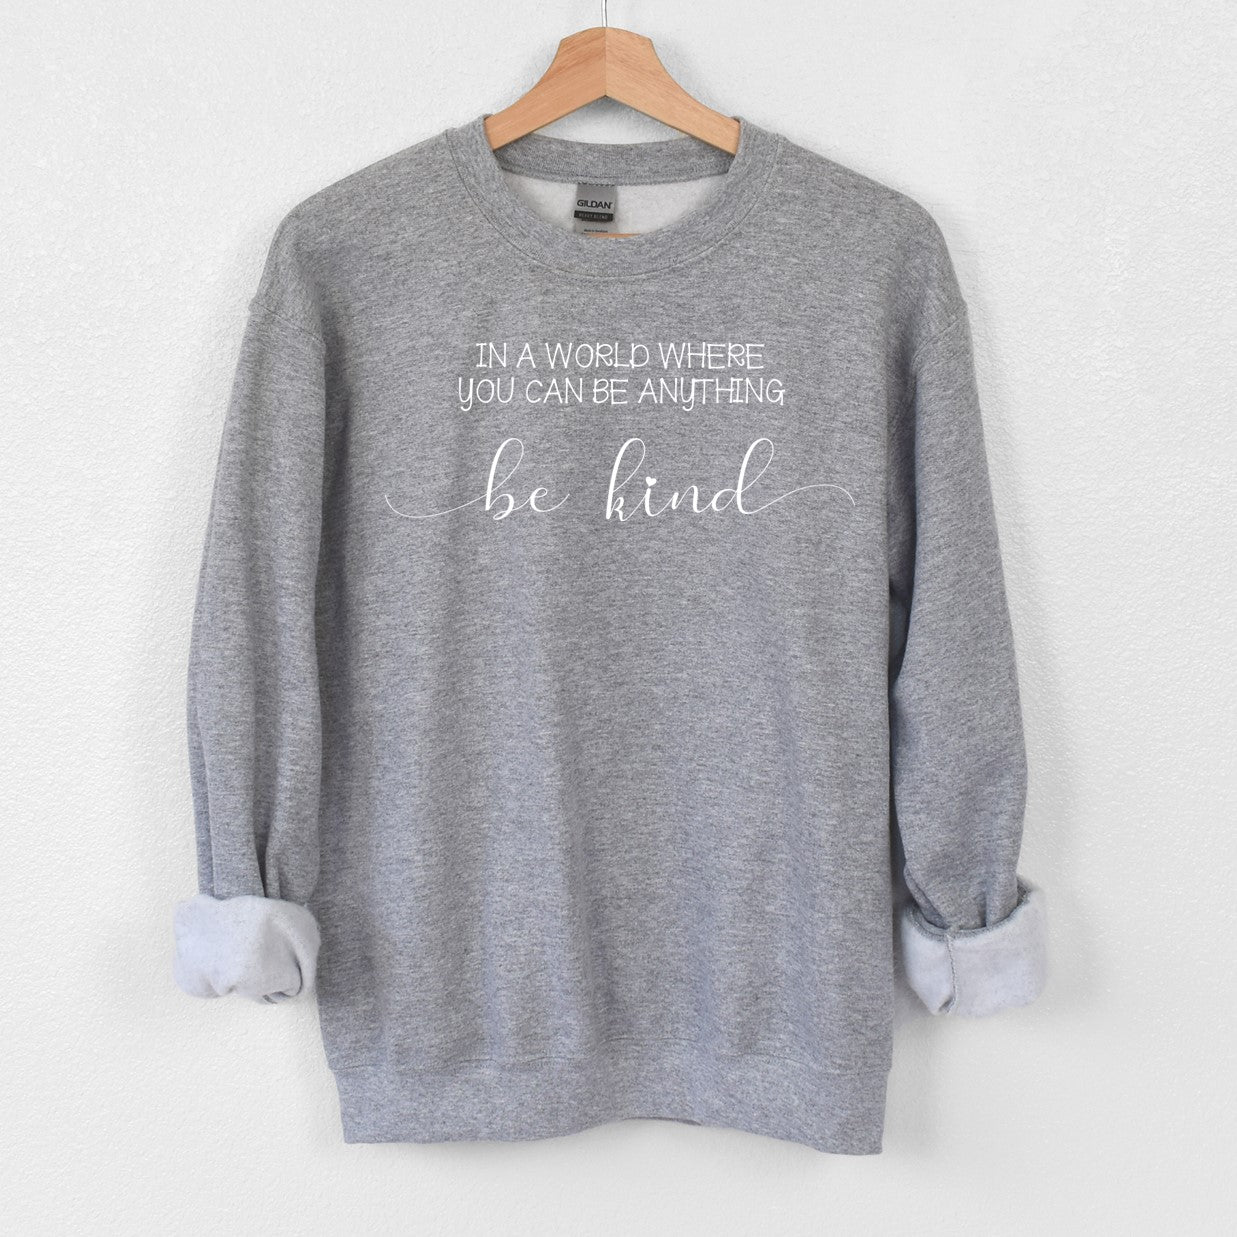 In a world where you can be anything...BE KIND- Tee or Sweatshirt